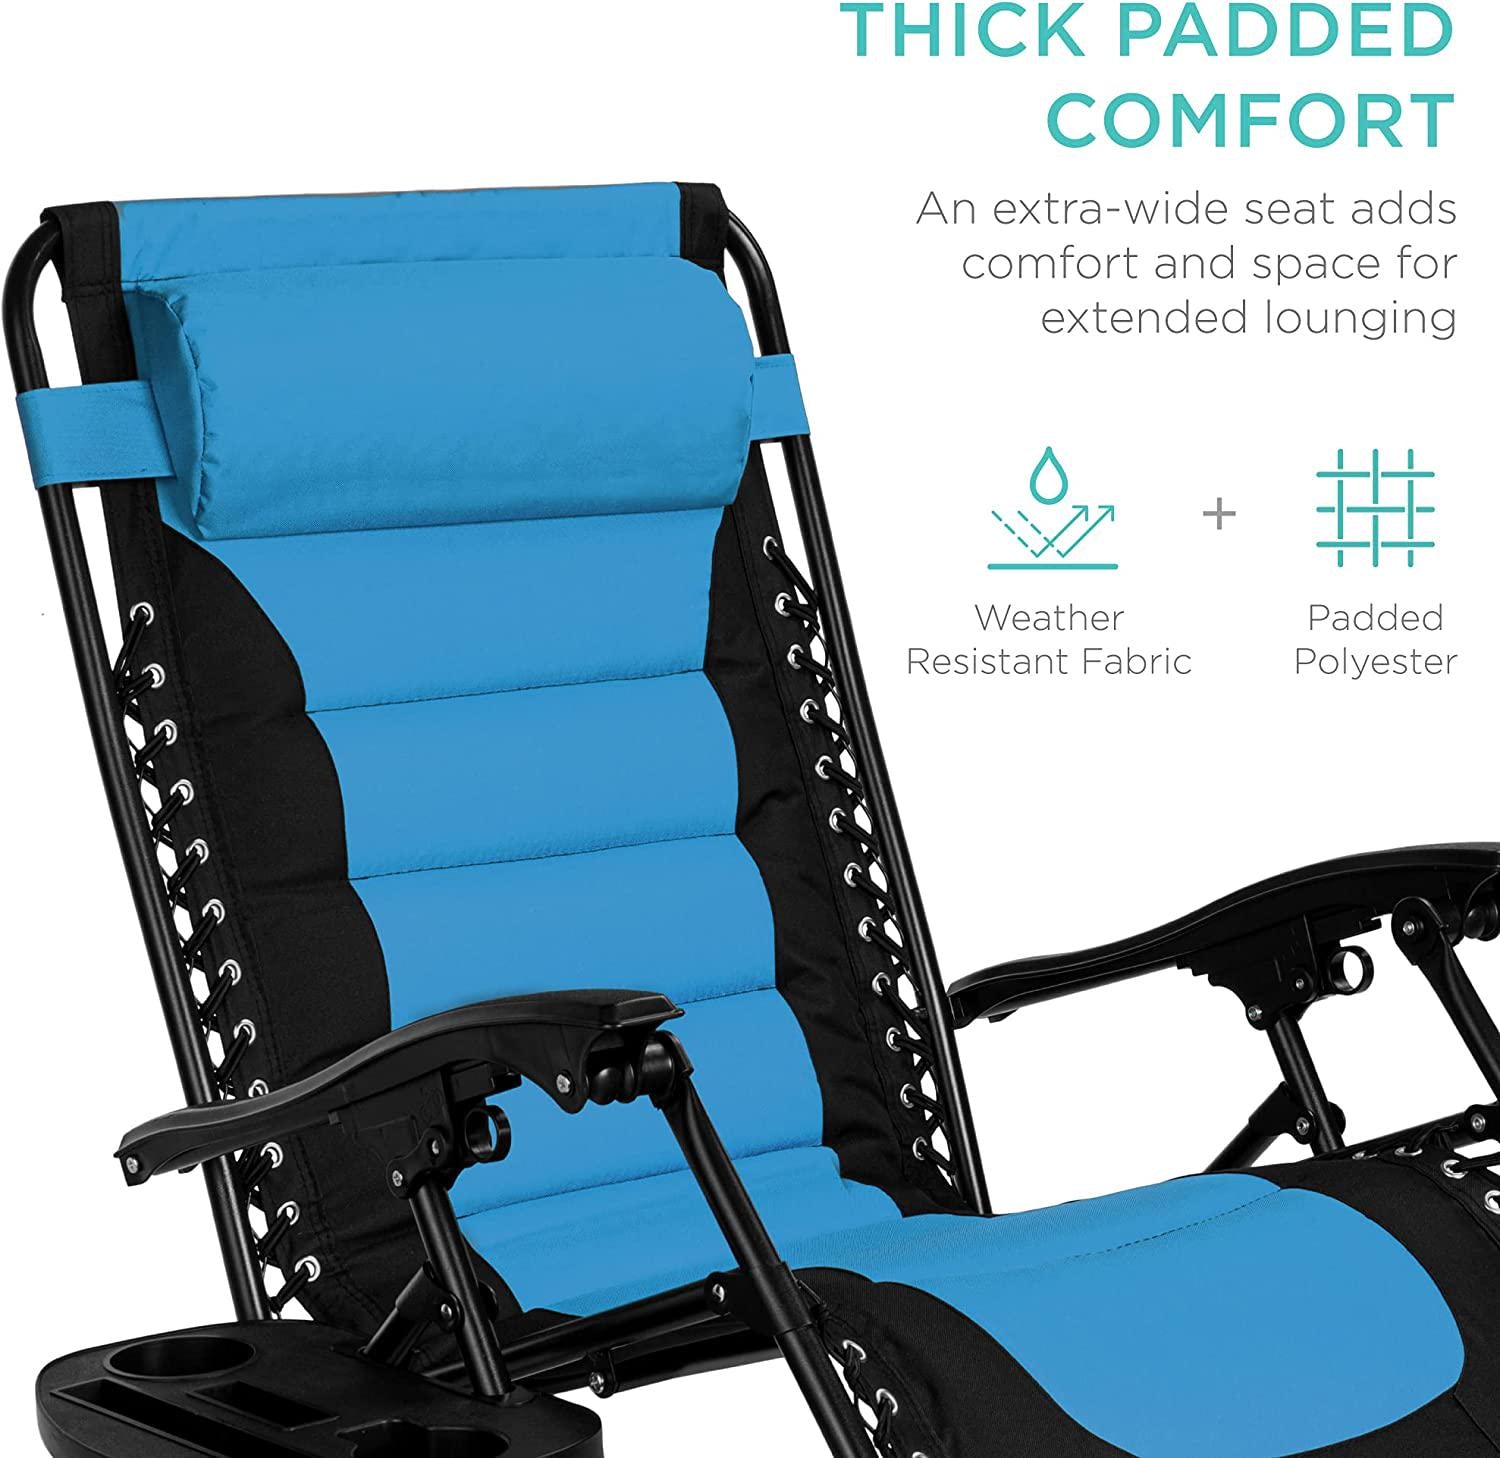 Oversized Padded Zero Gravity Chair, Folding Outdoor Patio Recliner, XL Anti Gravity Lounger for Backyard w/Headrest, Cup Holder, Side Tray, Outdoor Polyester Mesh